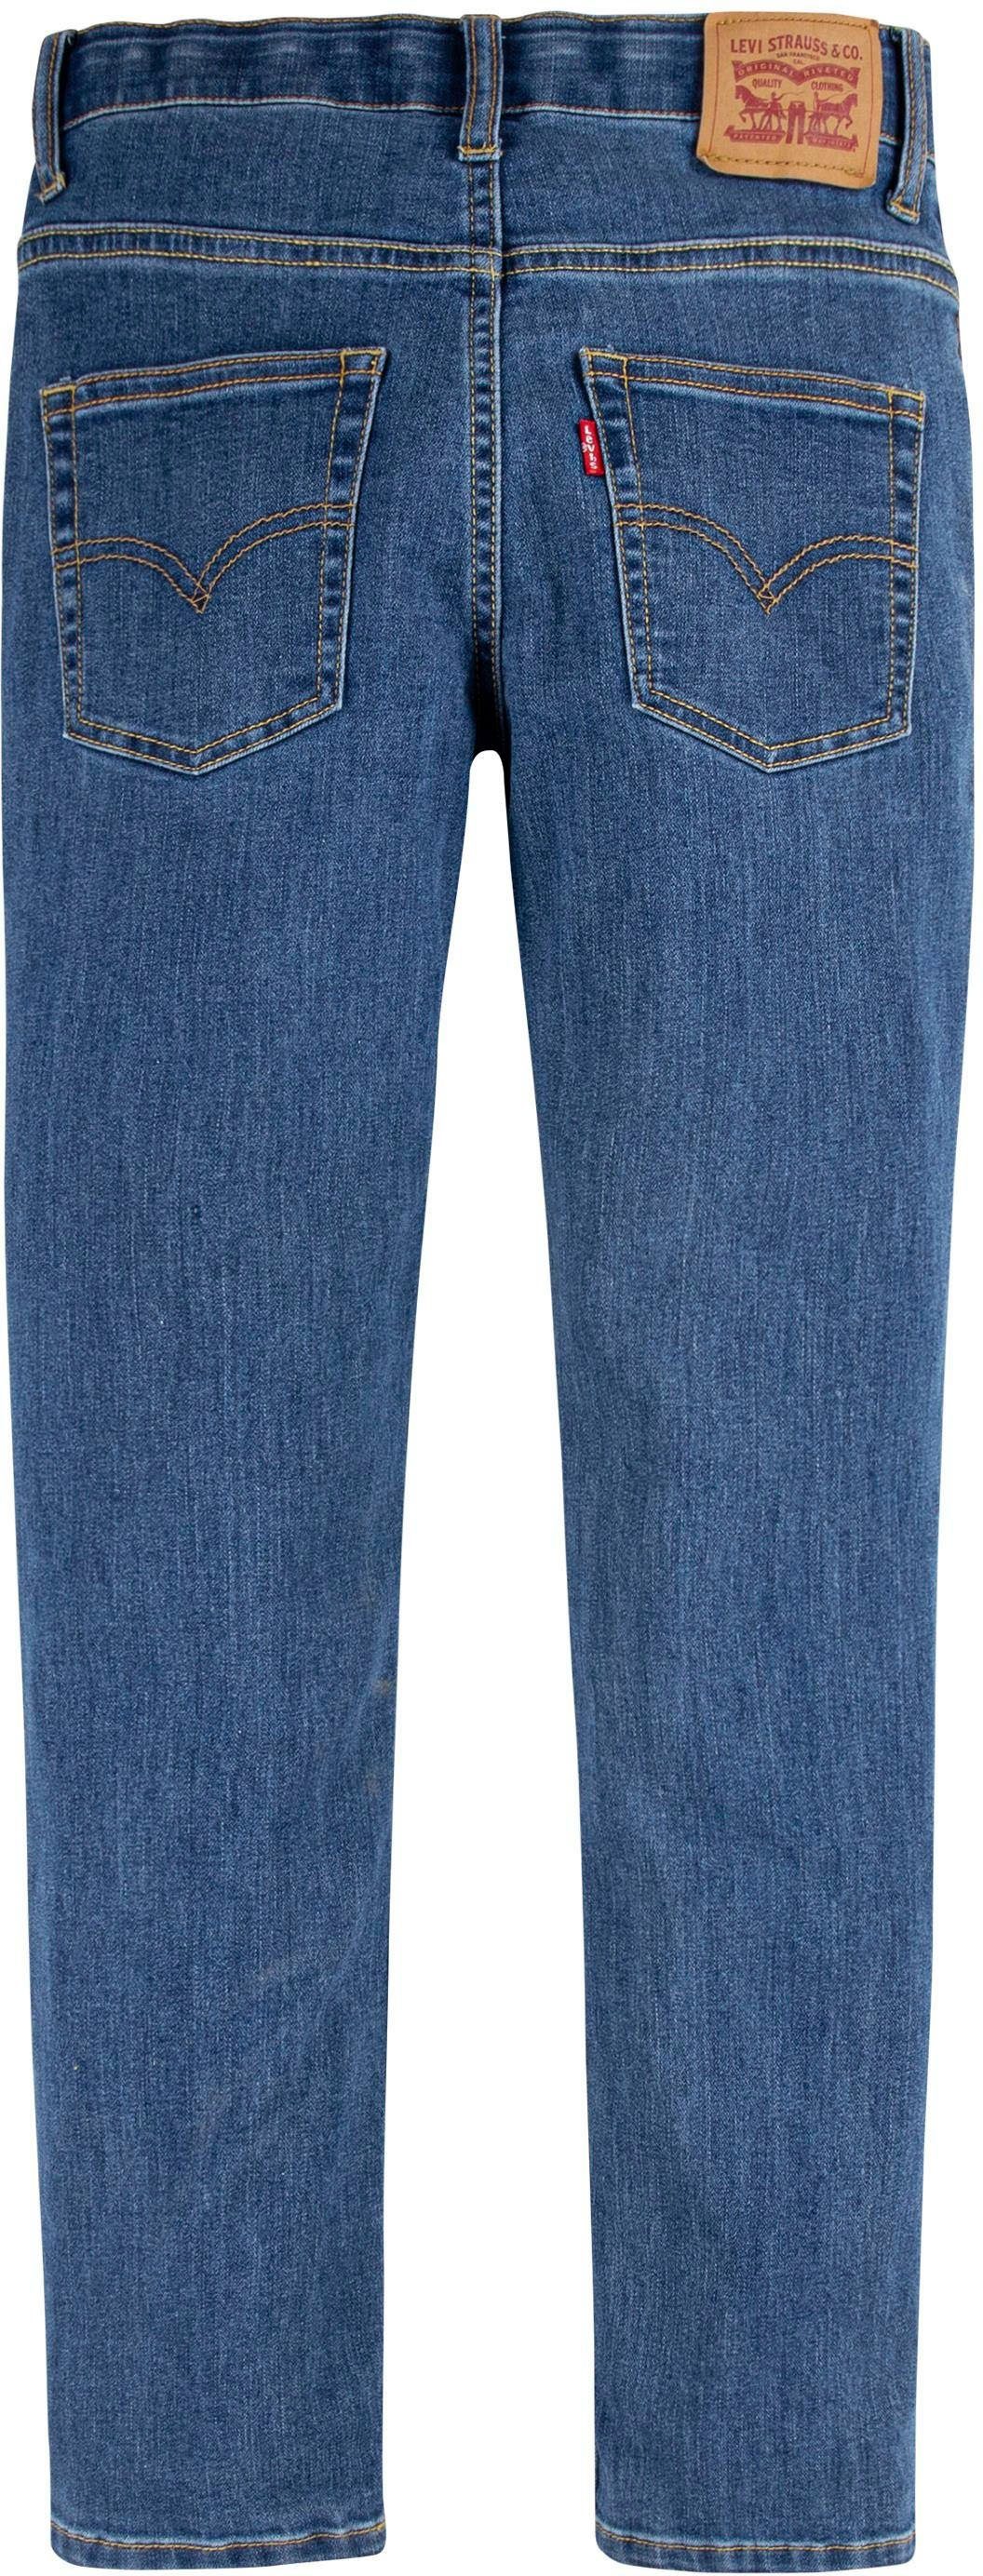 PERFORMANCE BOYS Levi's® STRONG Stretch-Jeans GUY GOOD for 512 Kids